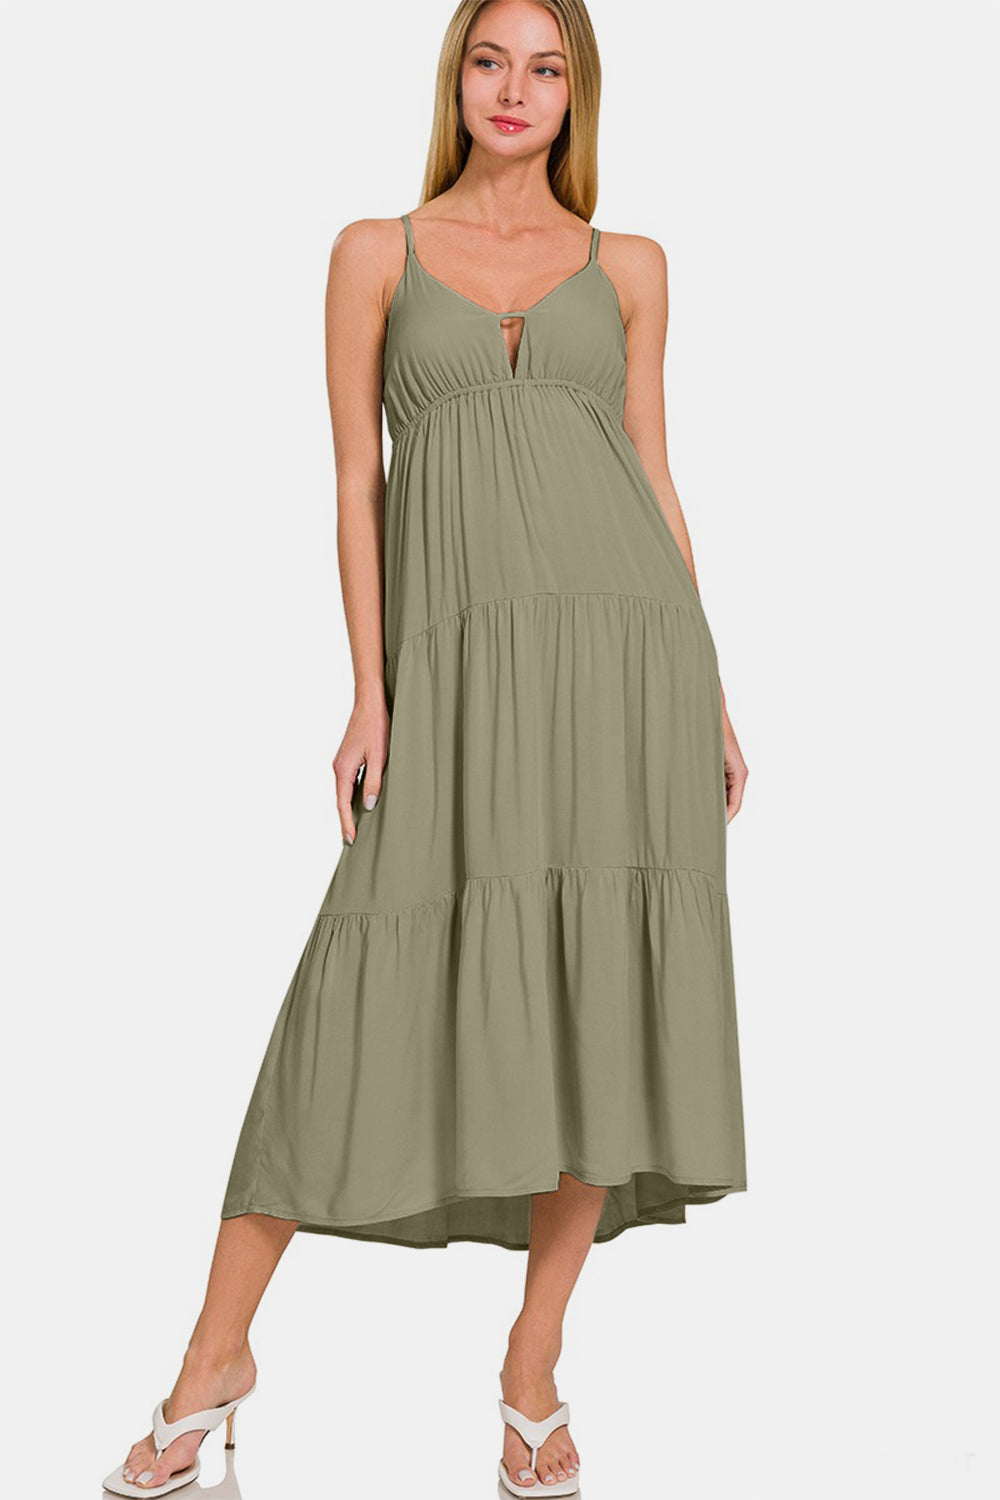 Zenana Woven Tiered Cami Midi Dress for Mature Women, Perfect as a Summer Beach or Wedding Guest Dress, Ideal for Over 50s